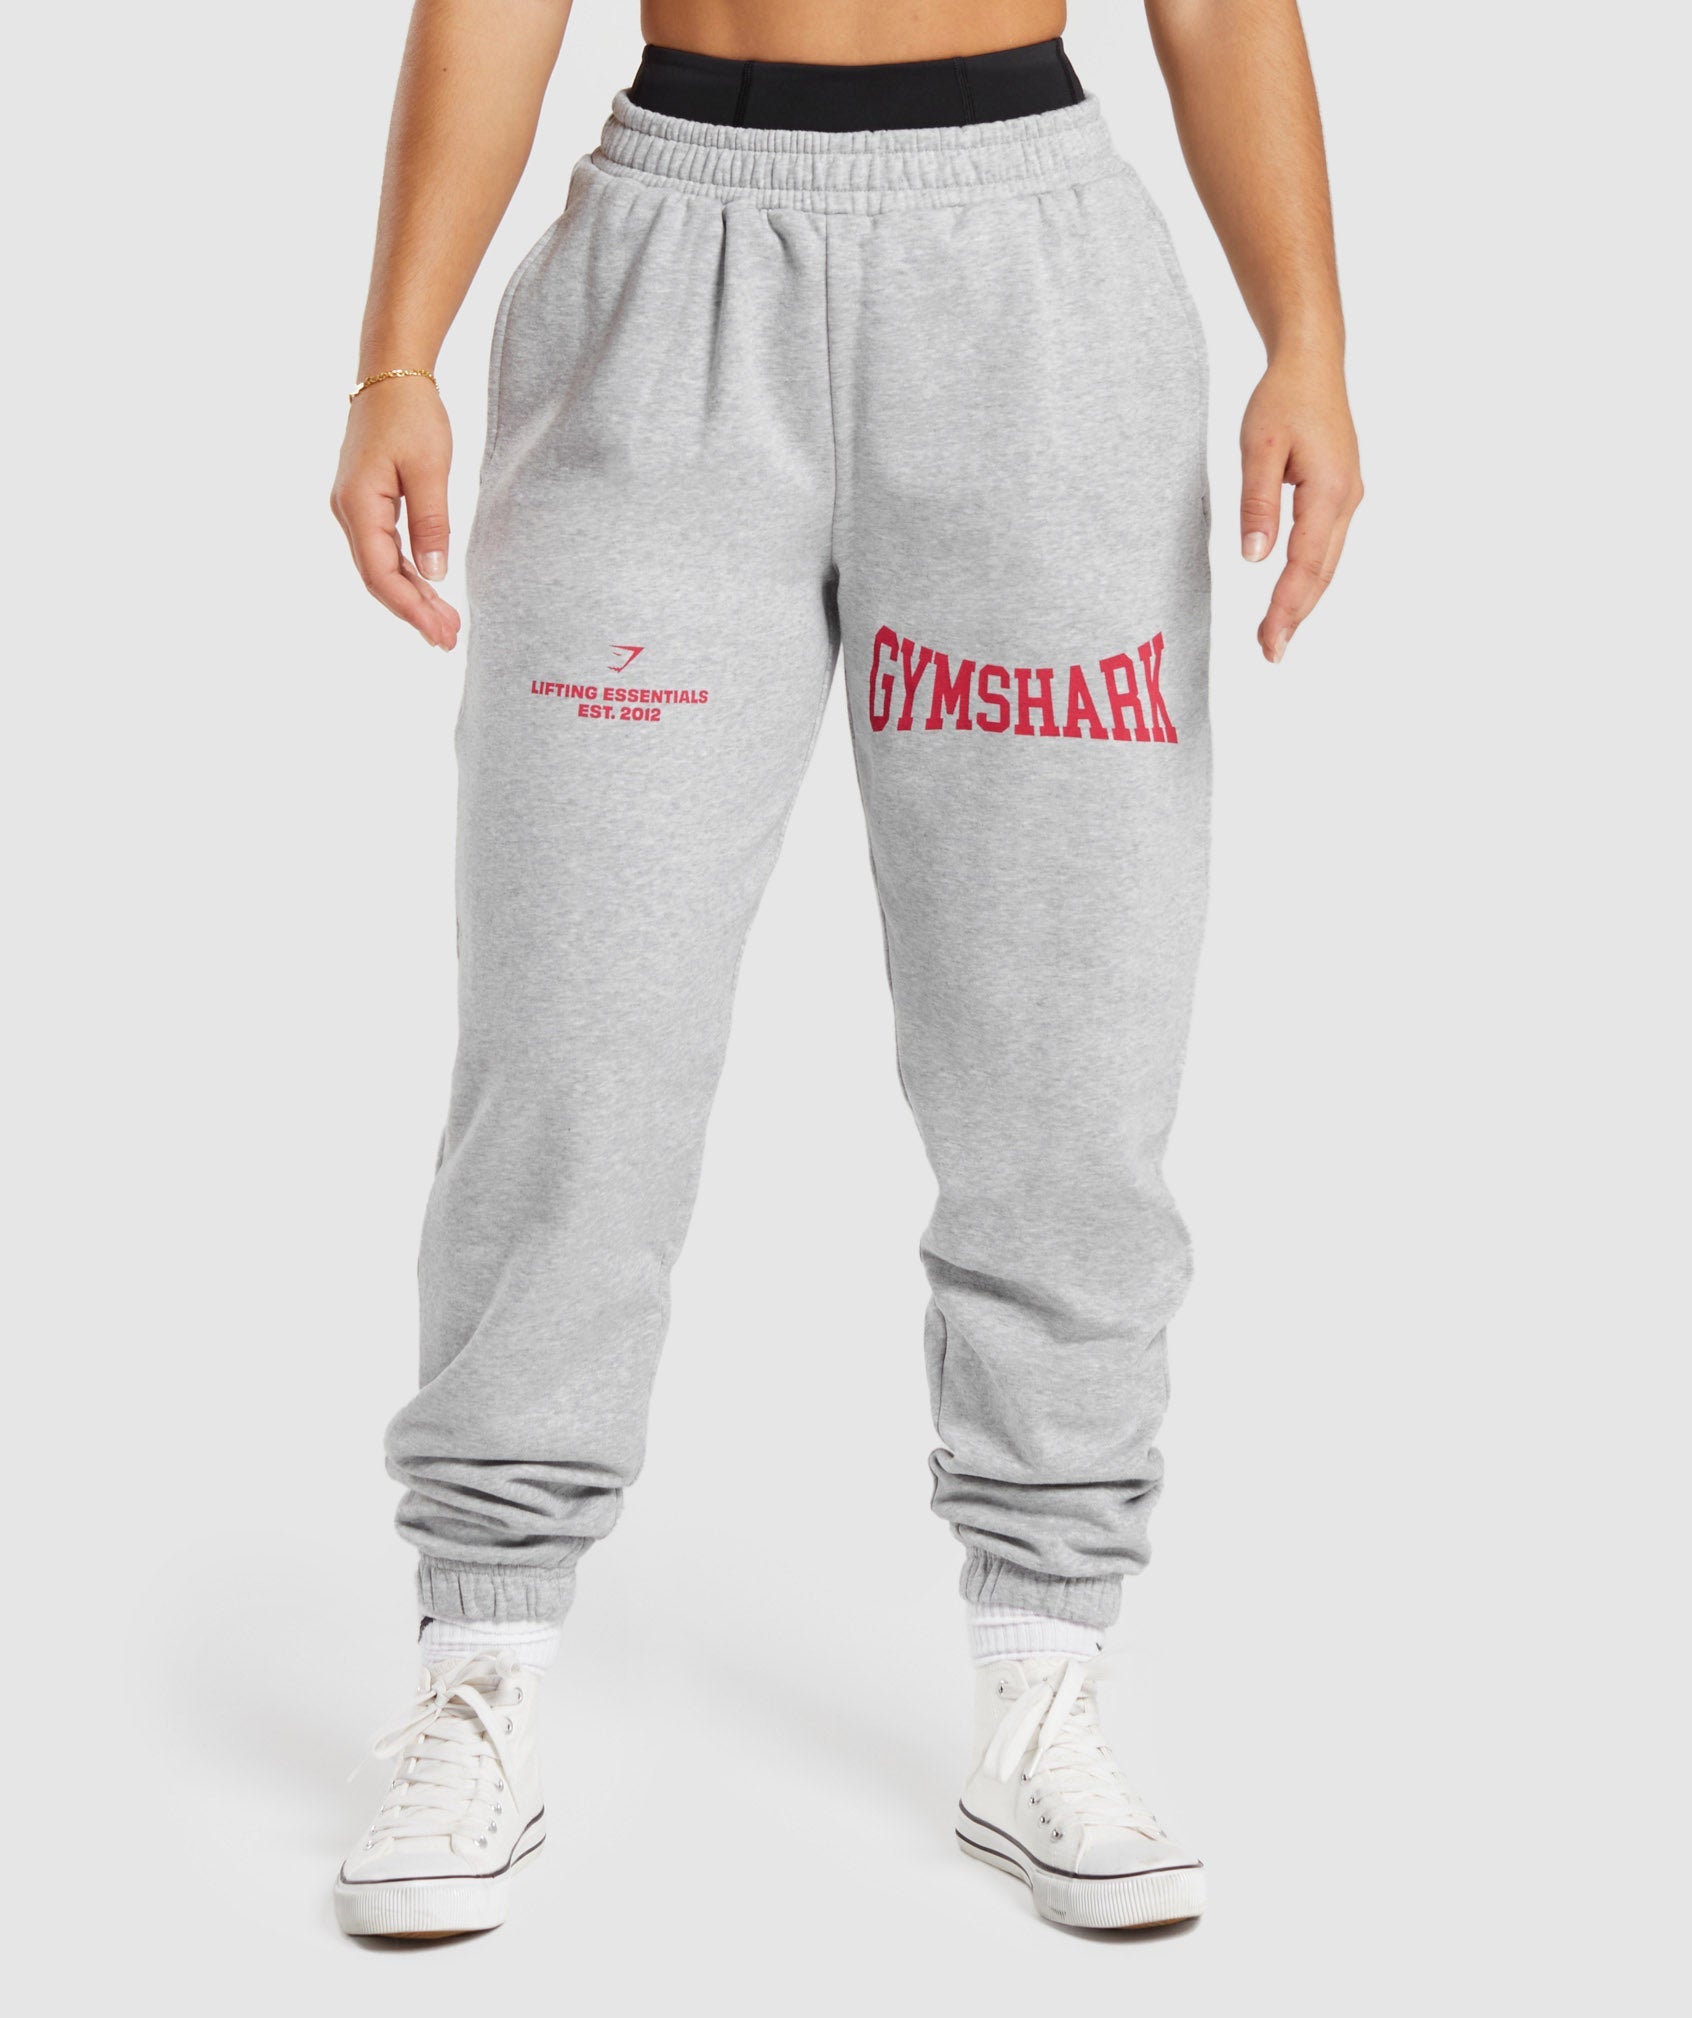 Lifting Essentials Graphic Joggers in Light Grey Core Marl - view 1